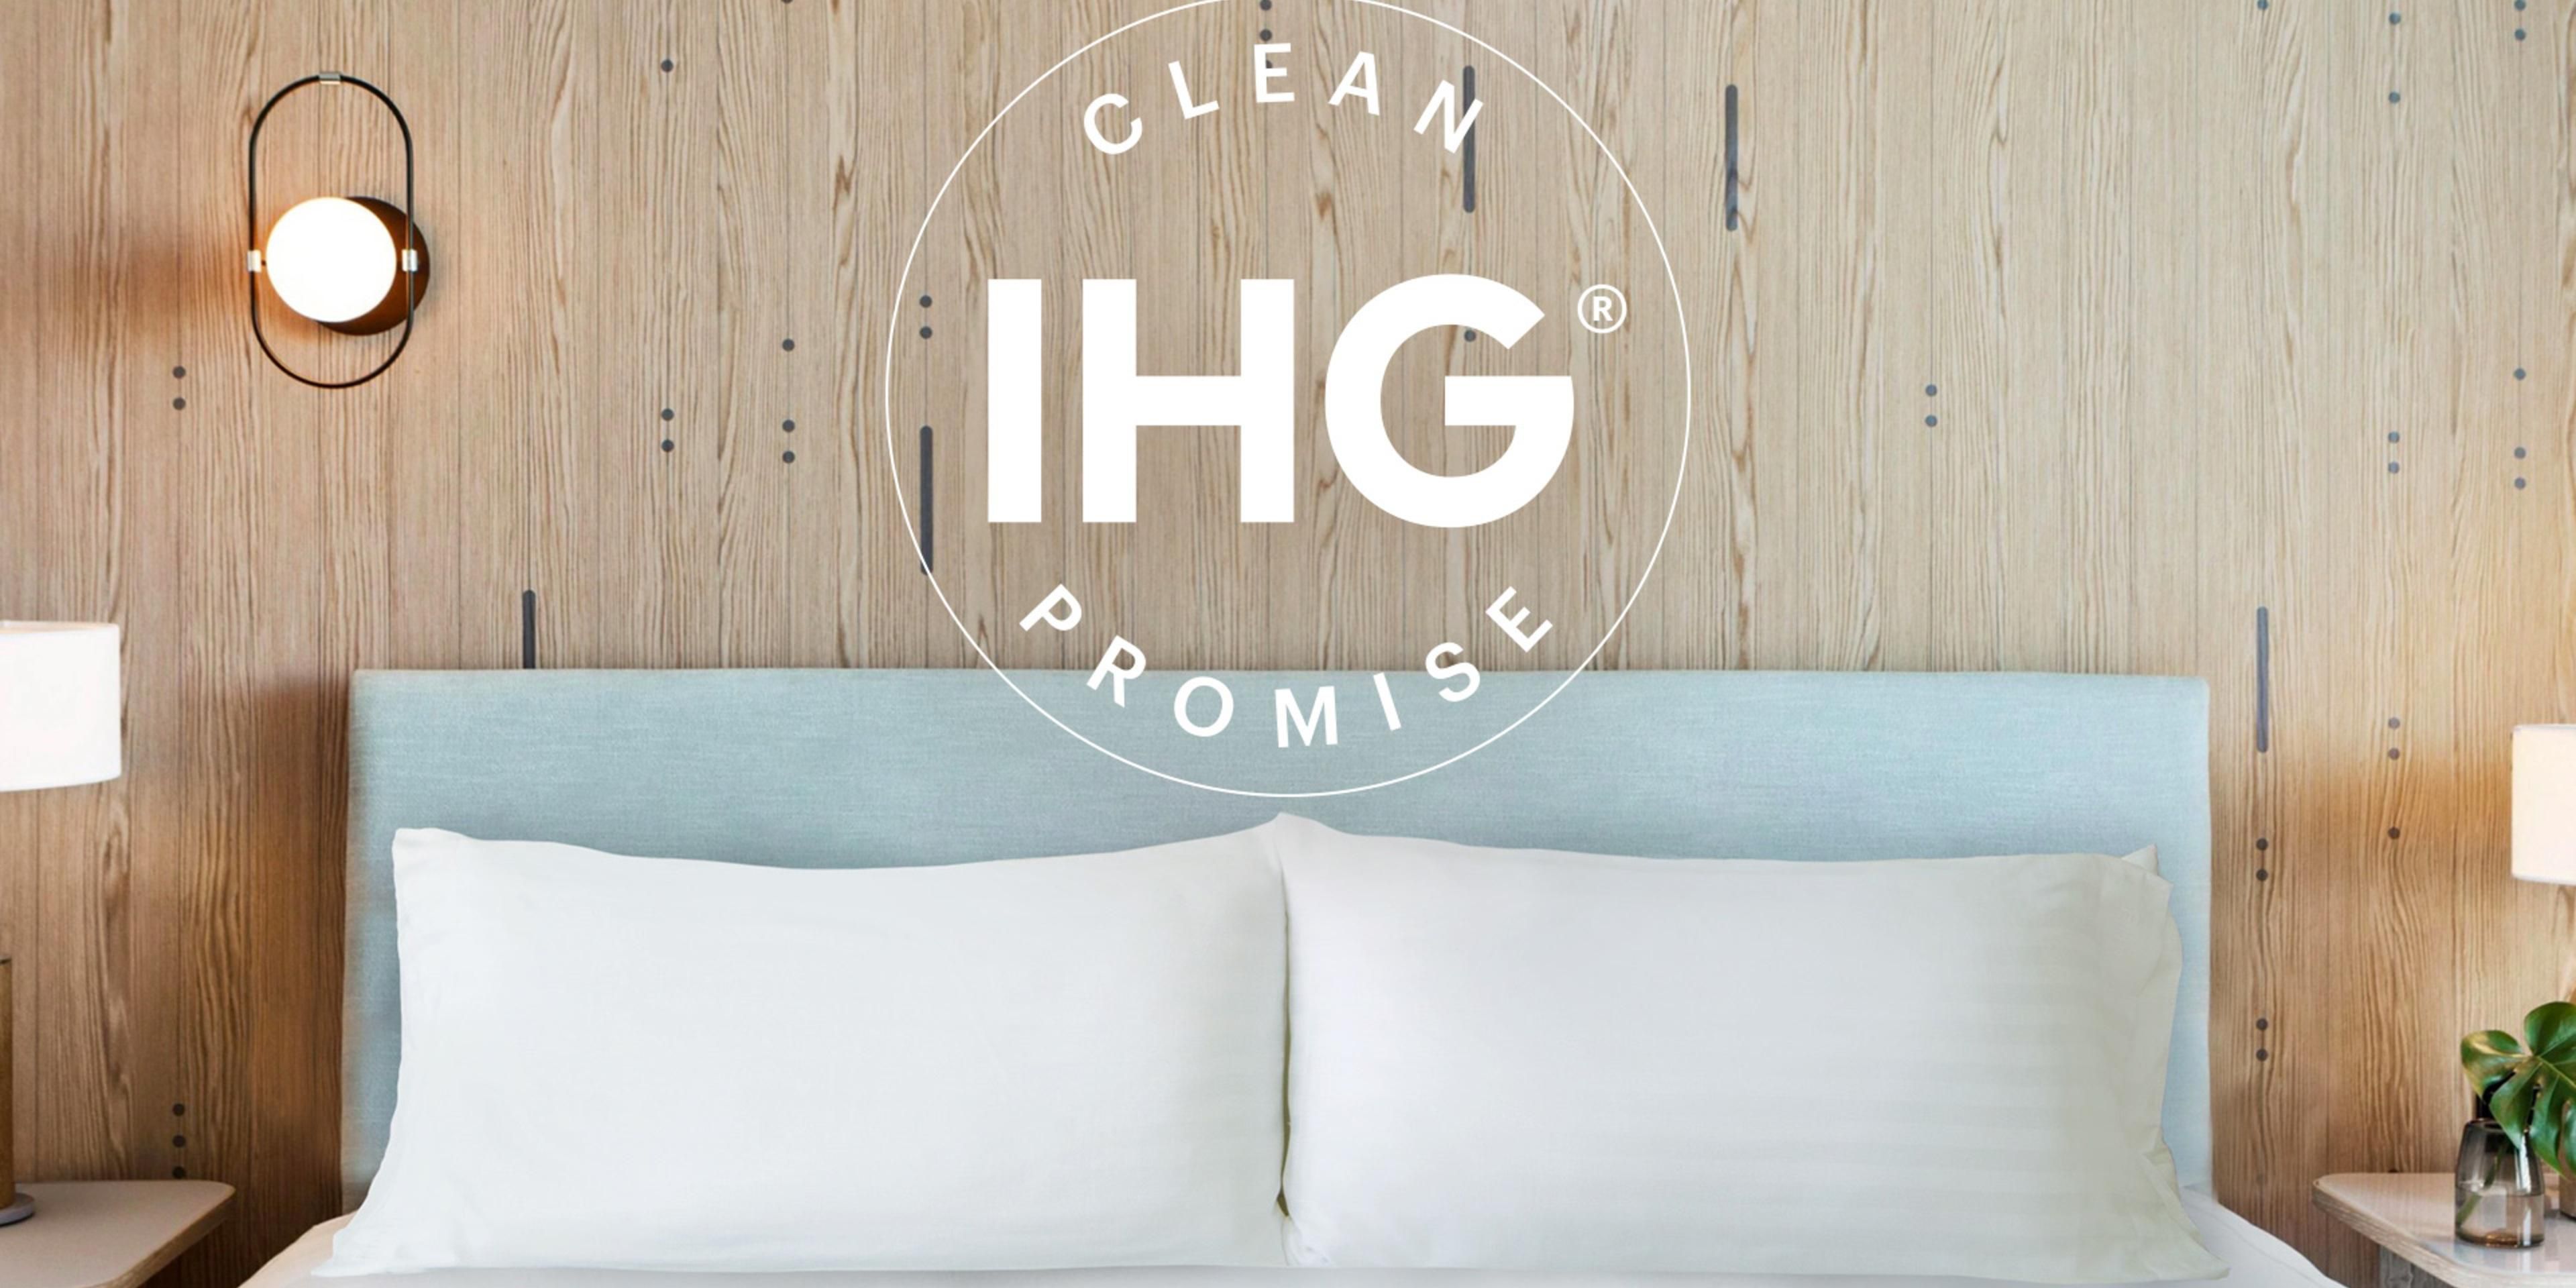 Good isn’t good enough – we’re committed to high levels of cleanliness. That means clean, well maintained, clutter free rooms that meet our standards. If this isn’t what you find when you check-in, then we promise to make it right.